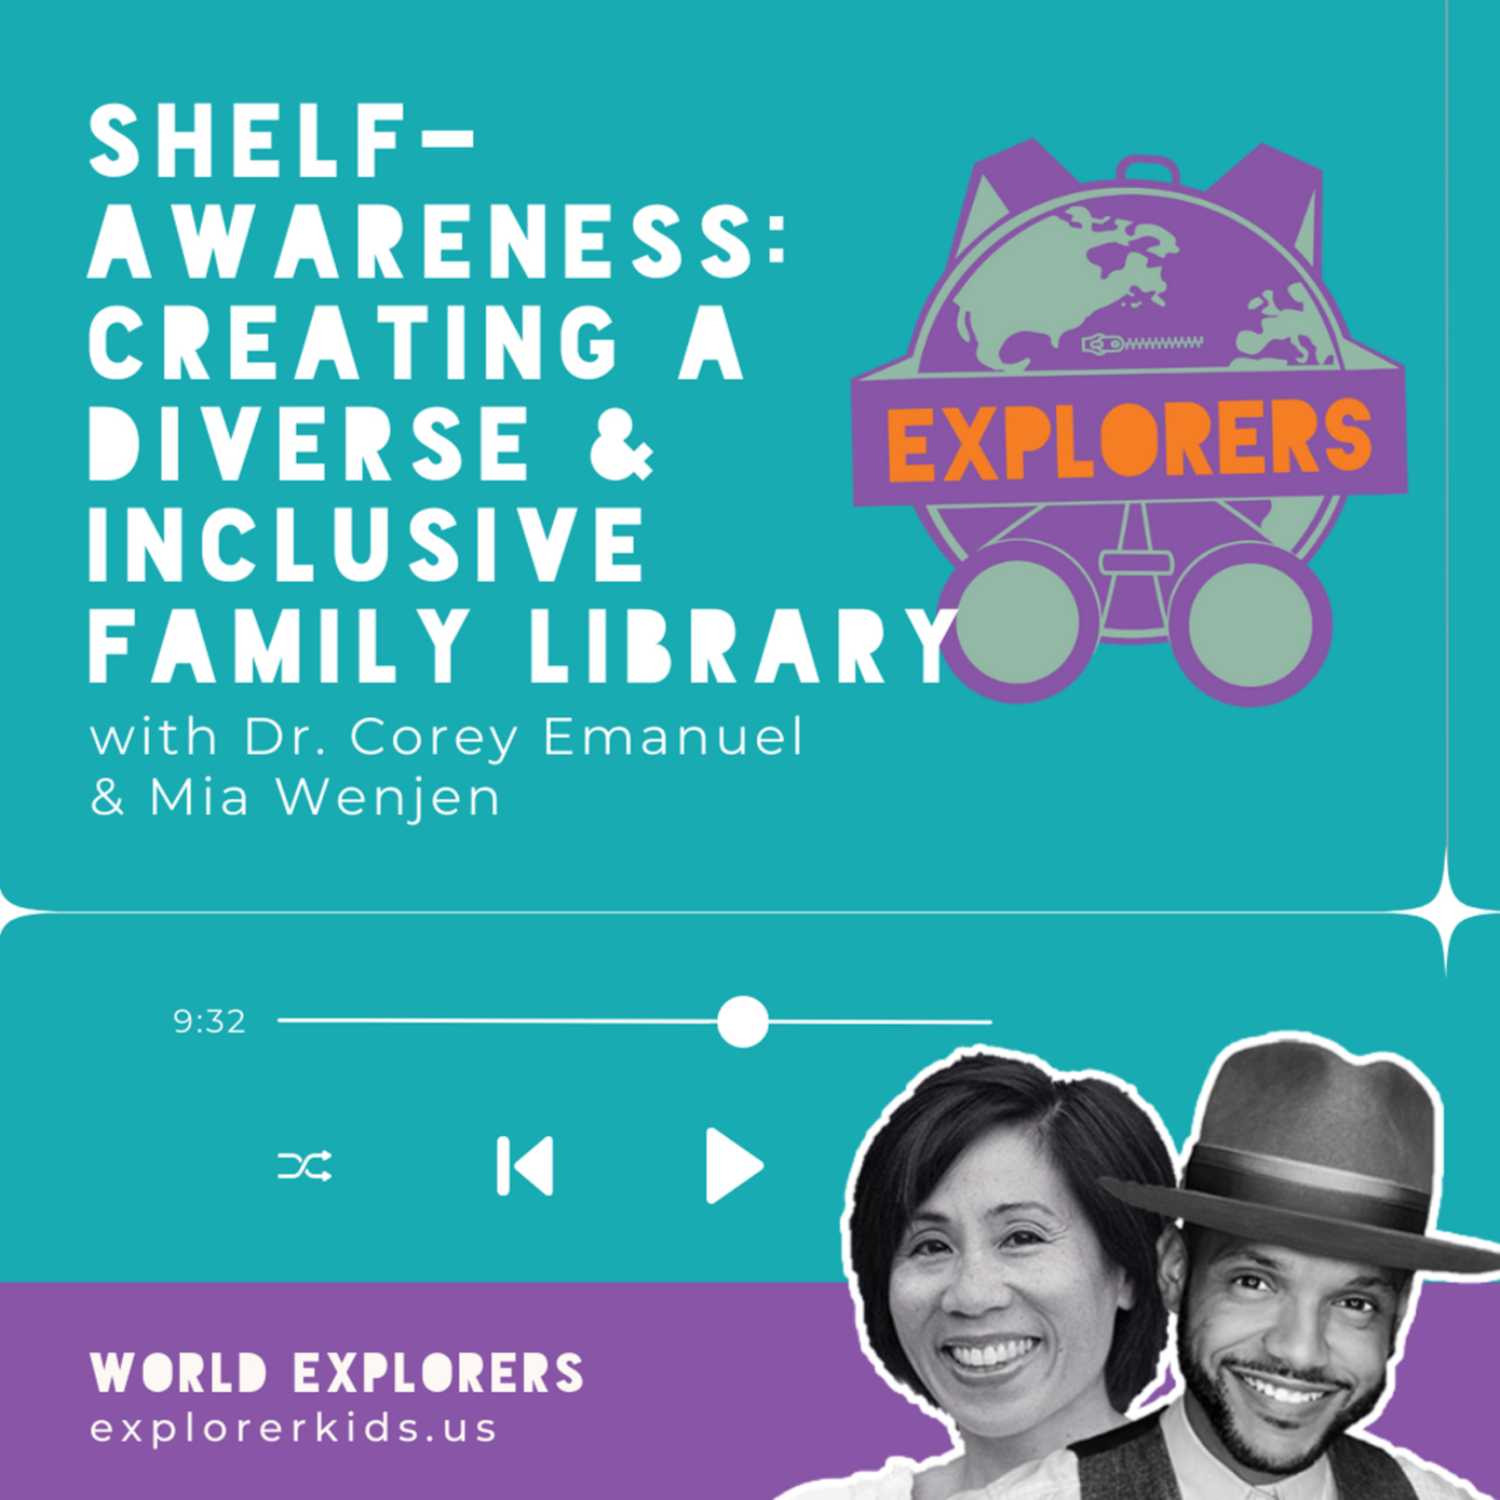 Shelf Awareness: Creating a Diverse & Inclusive Family Library